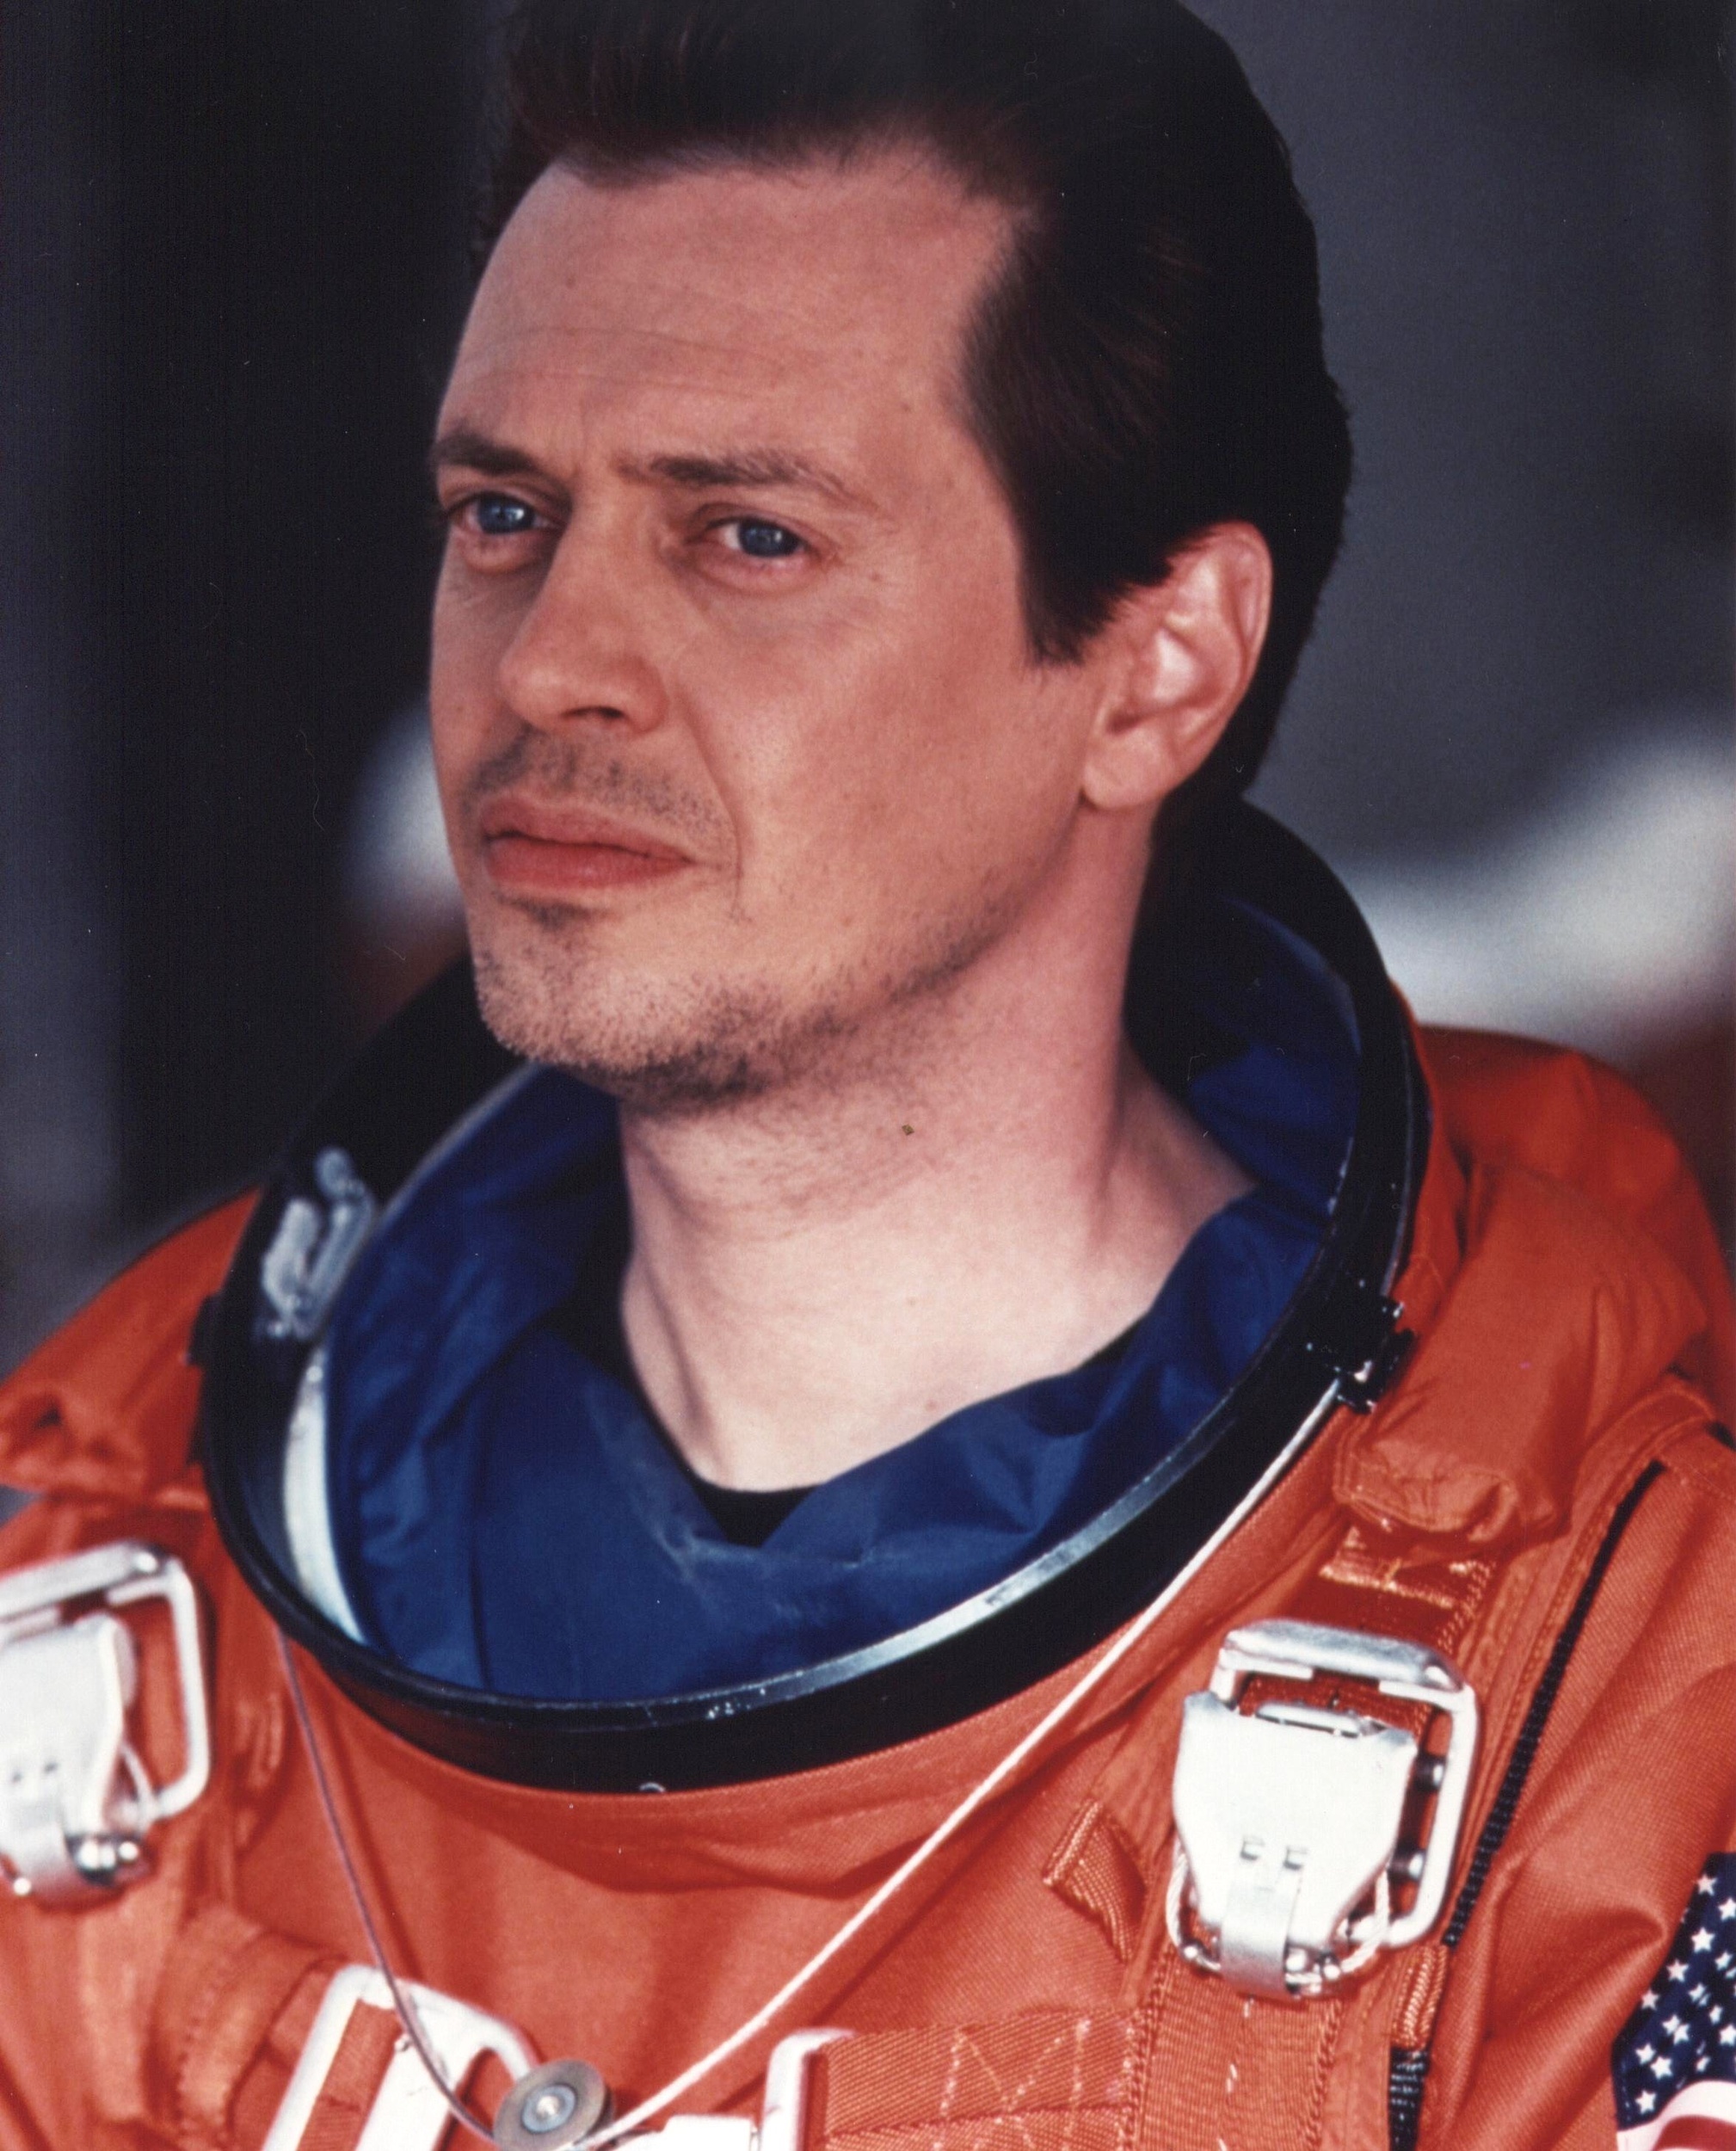 <p>Buscemi was in a run of playing sleazeball characters, and he was looking for a change of pace. That’s why he signed on to play Rockhound in <em>Armageddon</em>. As it was written, he was a stand-up guy. After Buscemi was cast, though, they started rewriting the script to make the character, well, sleazier.</p>